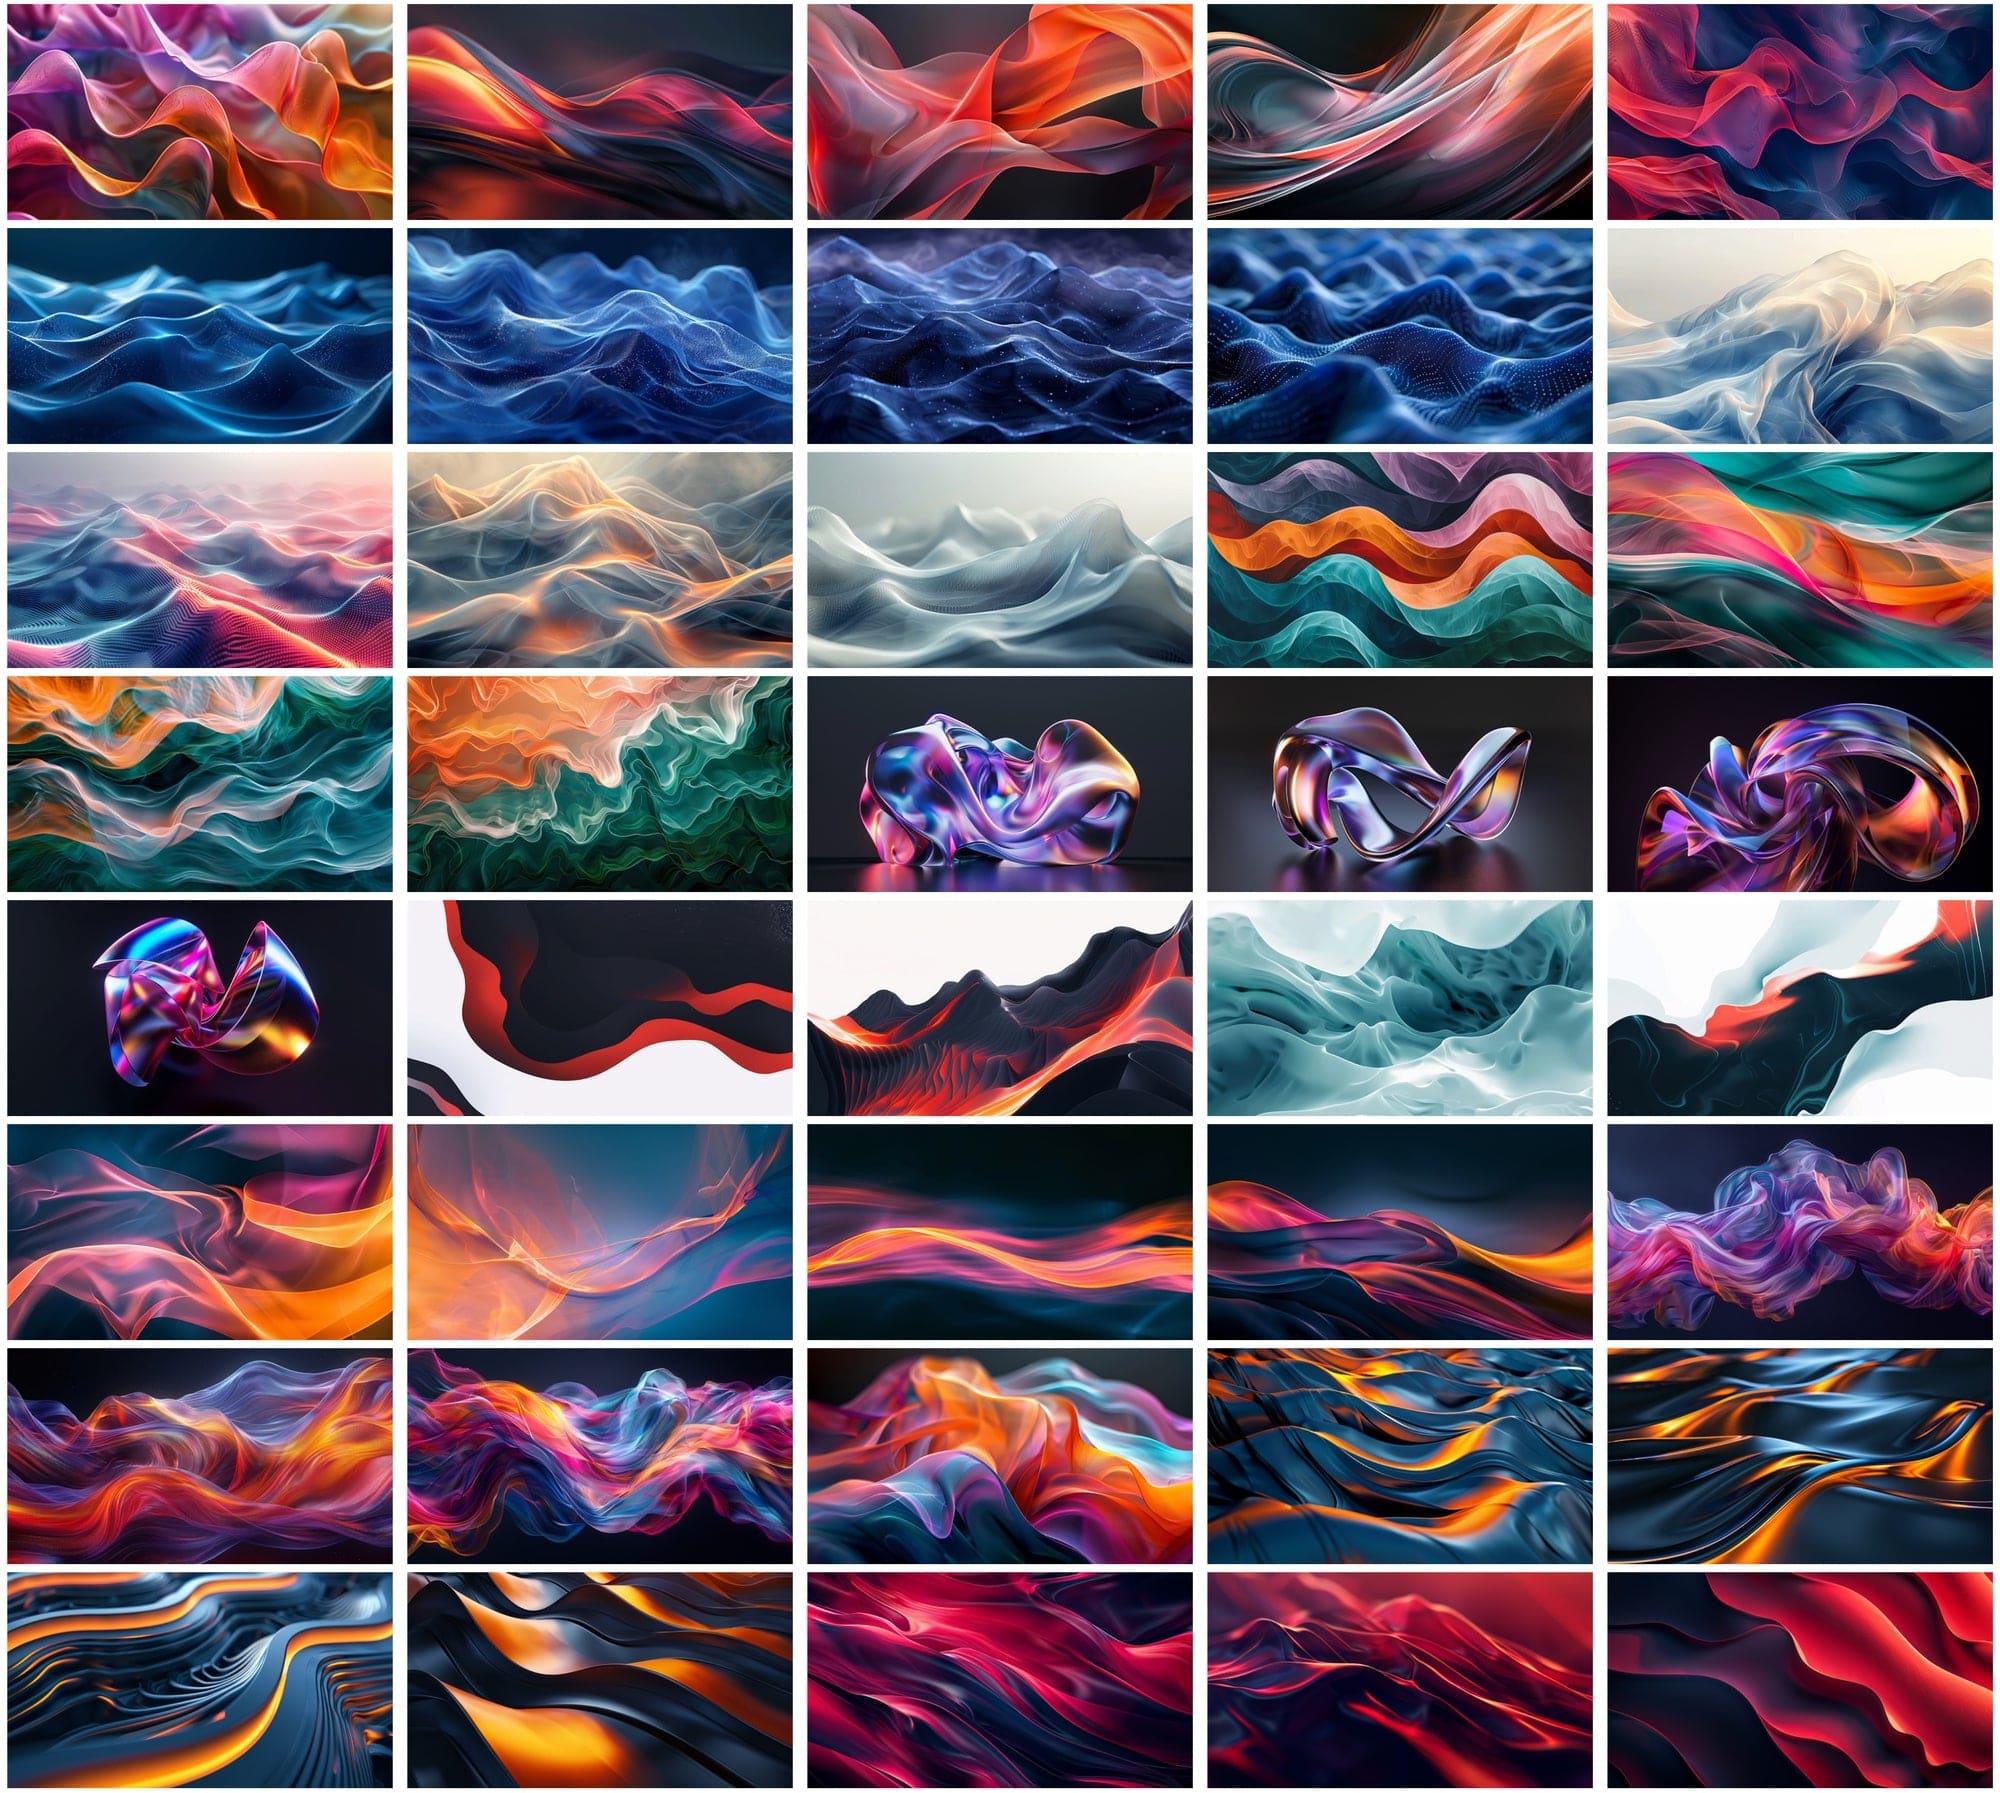 Ultimate Collection of 500 Hero Images & Wallpapers - Neon, Abstract, and Futuristic Designs Digital Download Sumobundle